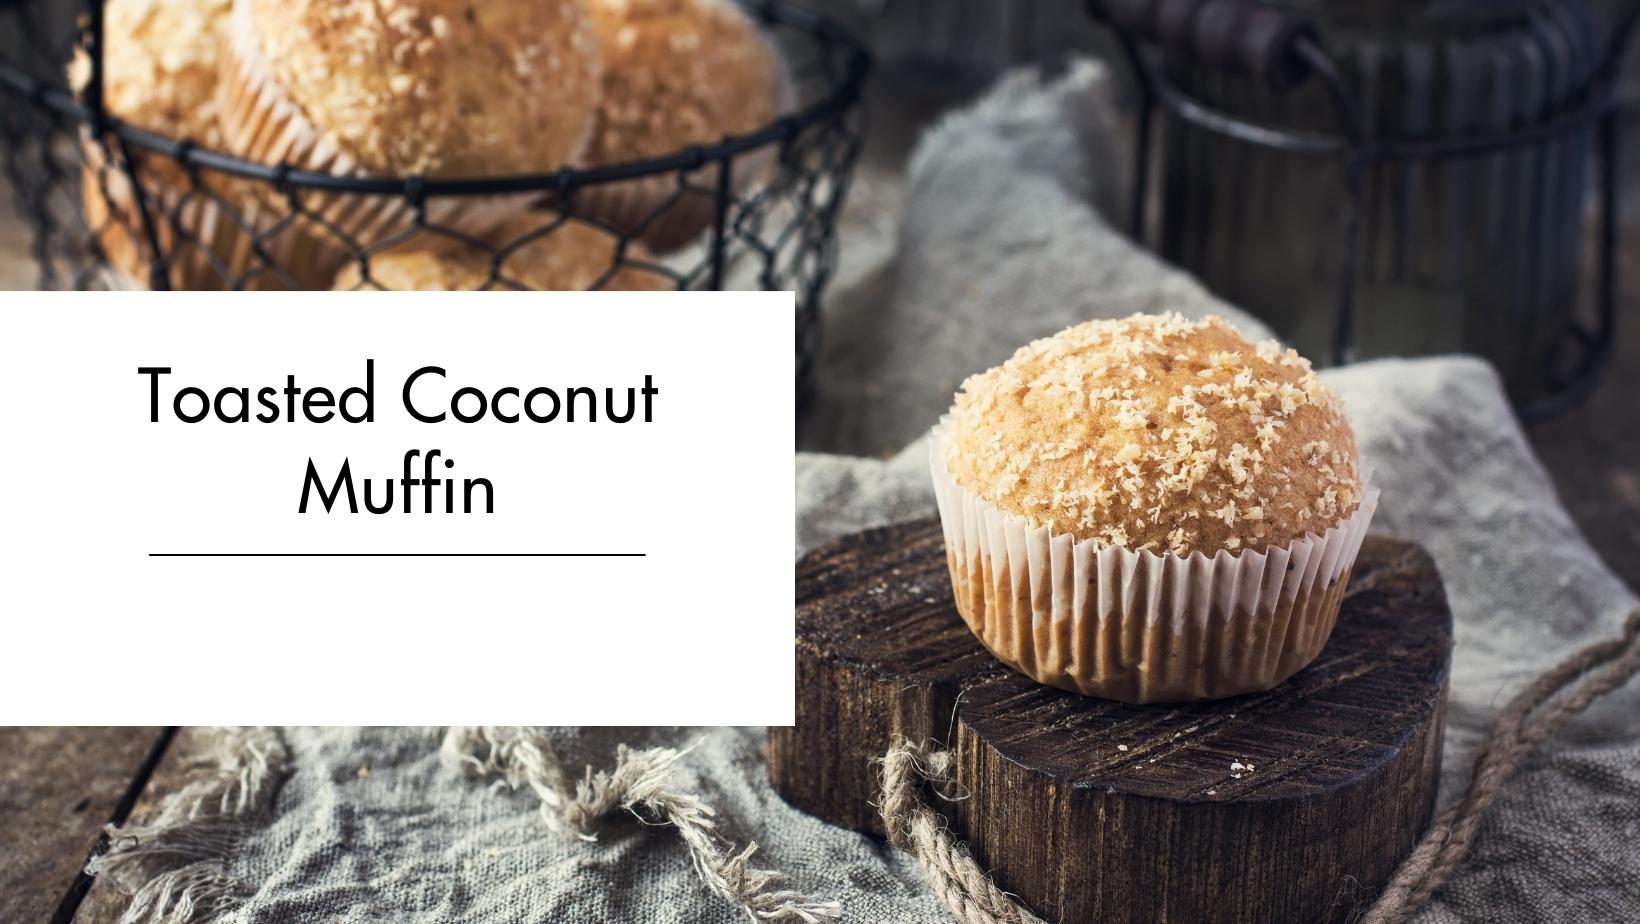 Toasted Coconut Muffin